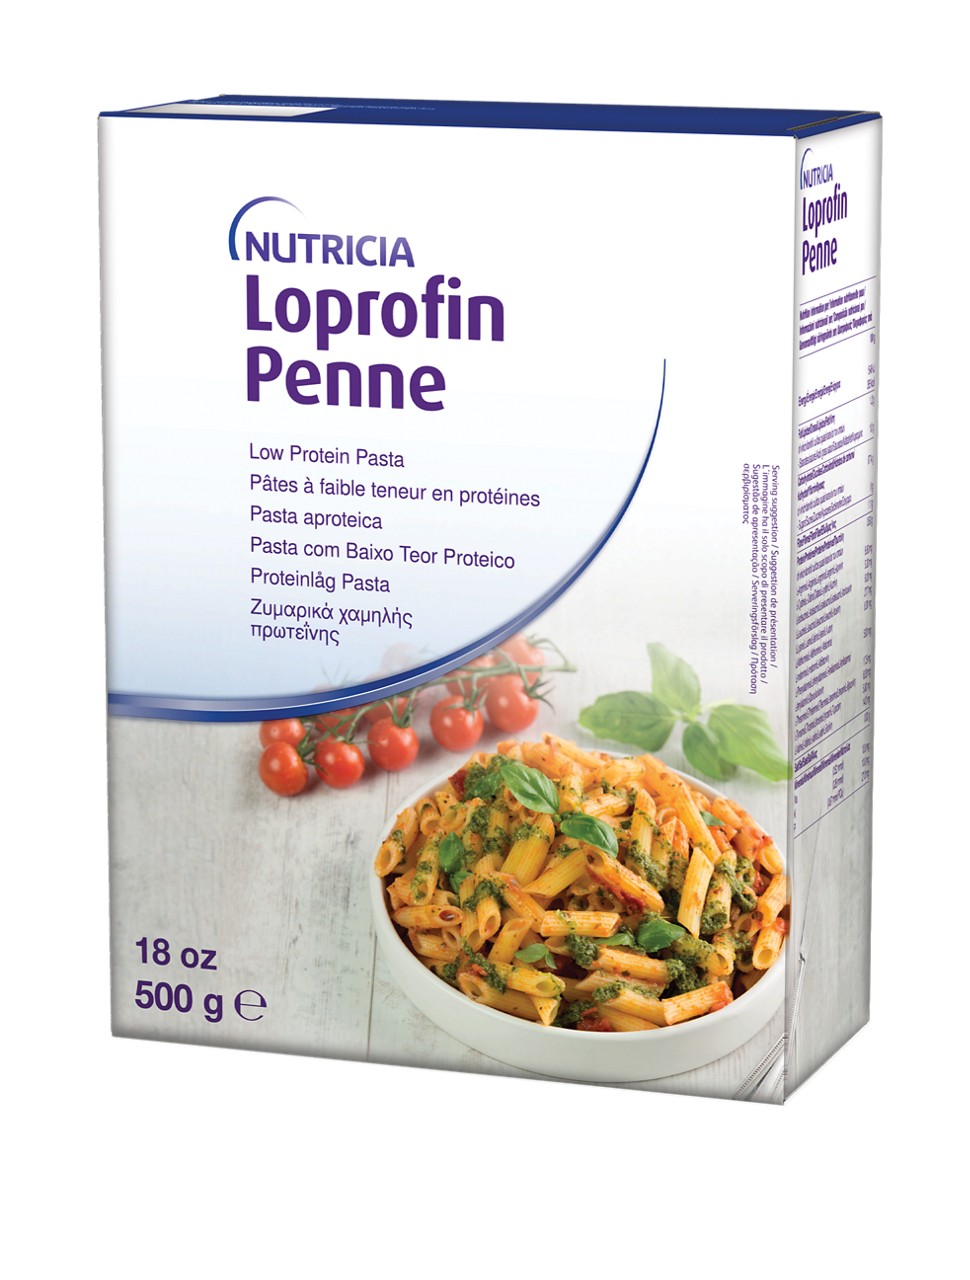 Loprofin Low Protein Pasta Penne 500g Box